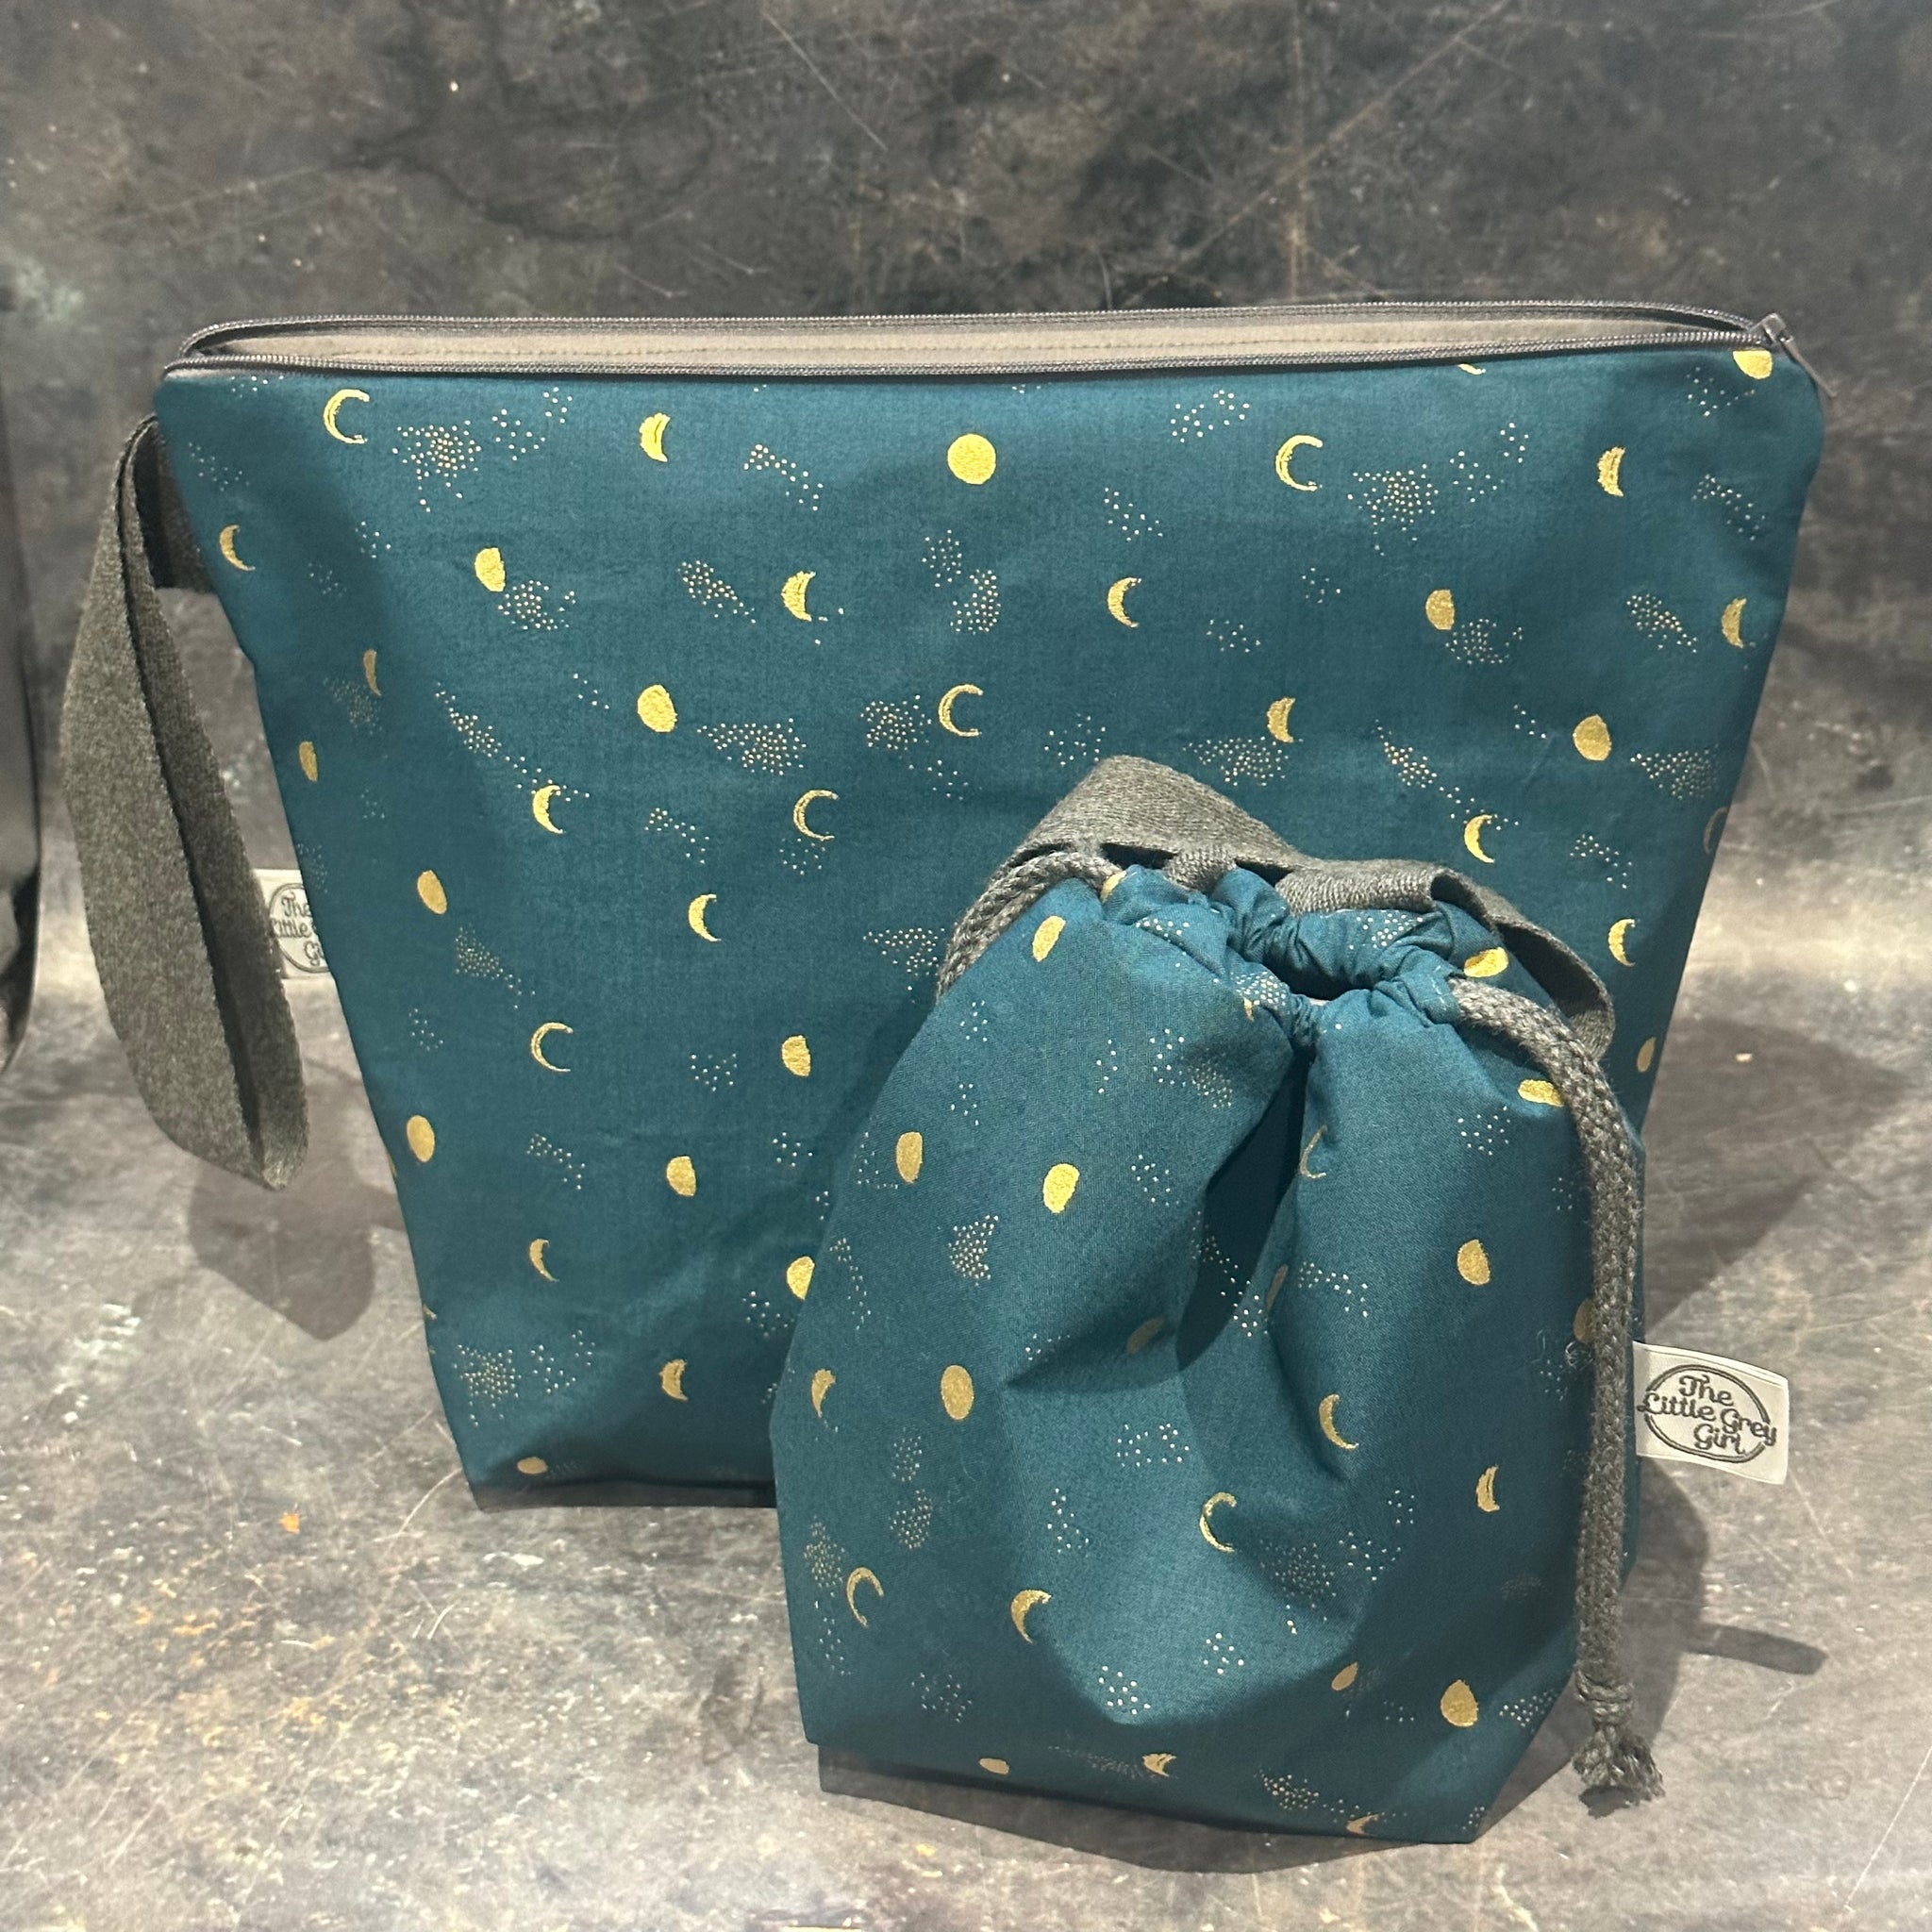 Moon Phase Galaxy - Hand Made Project Bags